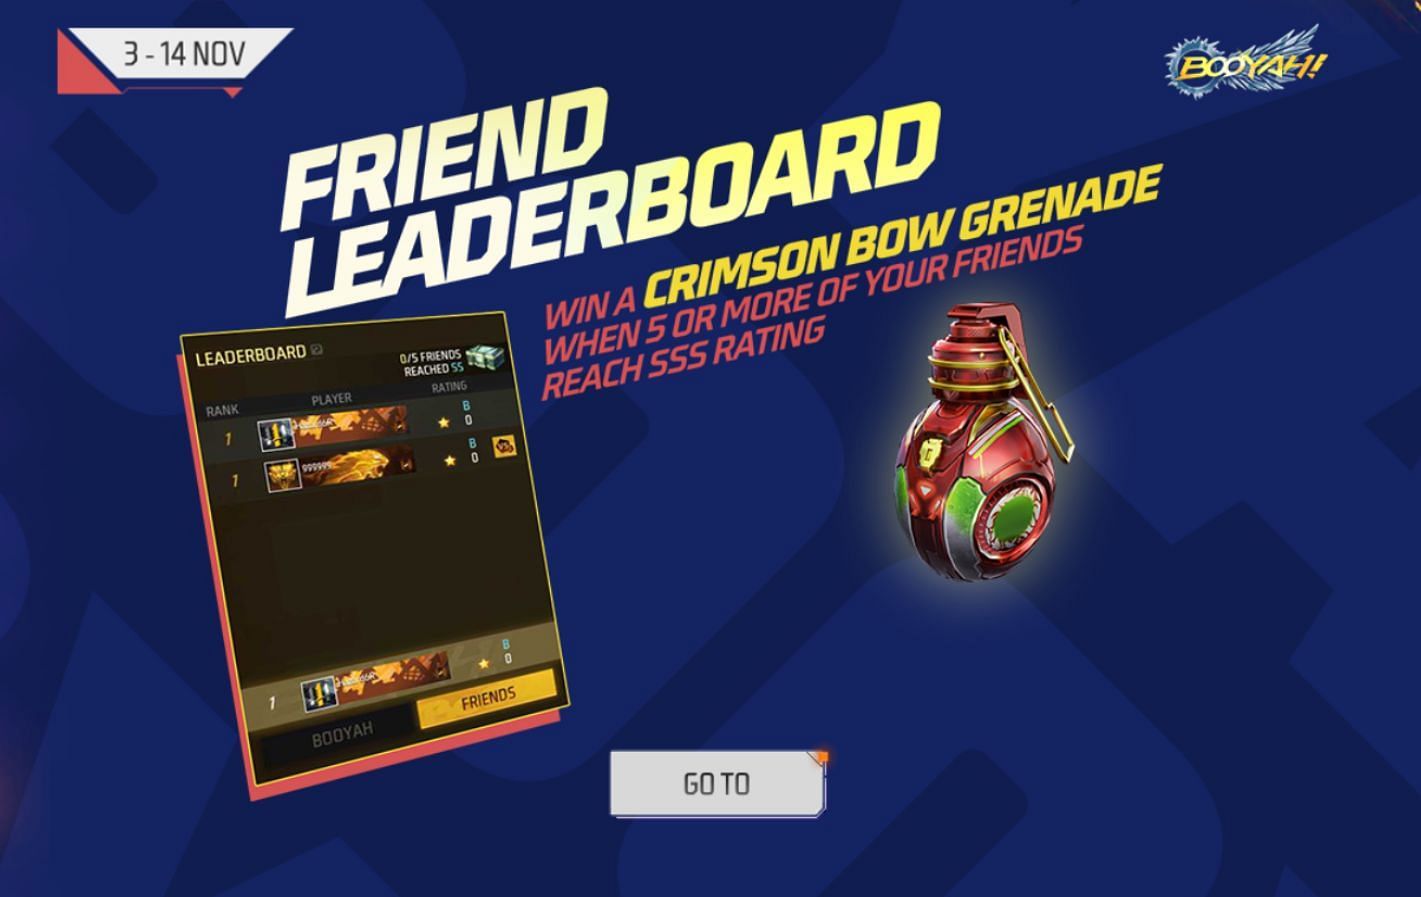 Crimson Bow Grenade is available for free via Friend Leaderboard mission of Booyah Day (Image via Garena)